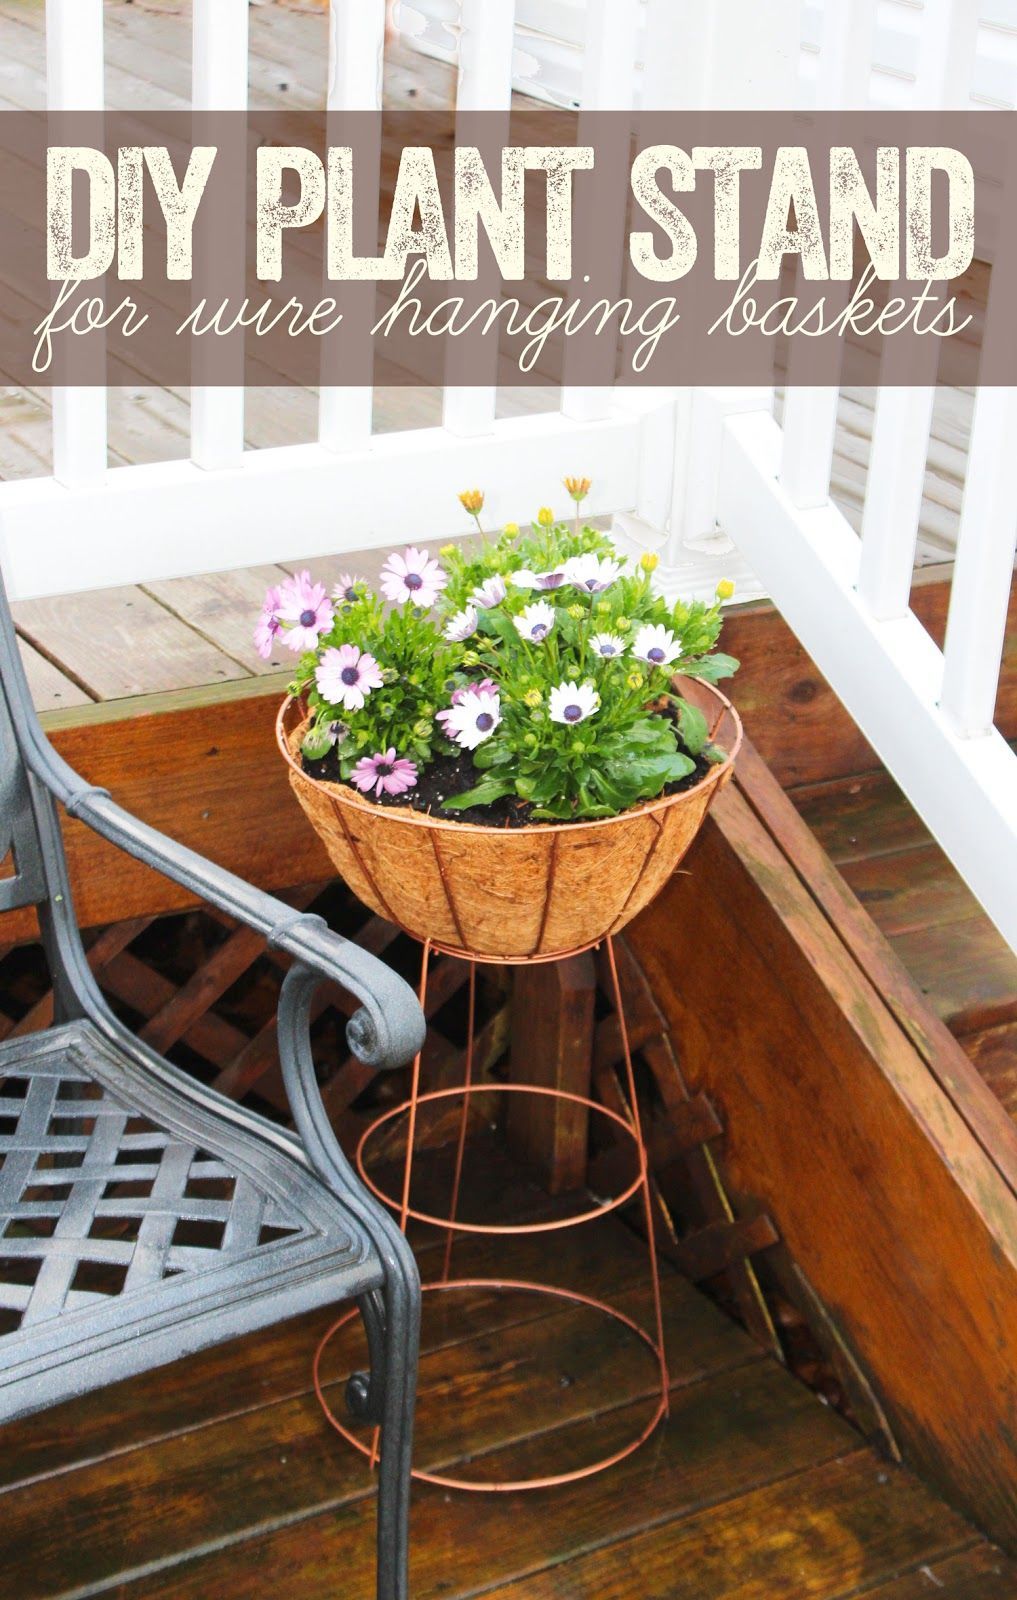 Adding a pop of spring color with Monrovia plants and easy DIY repurposed hanging basket stand -   13 plants Stand repurposed ideas